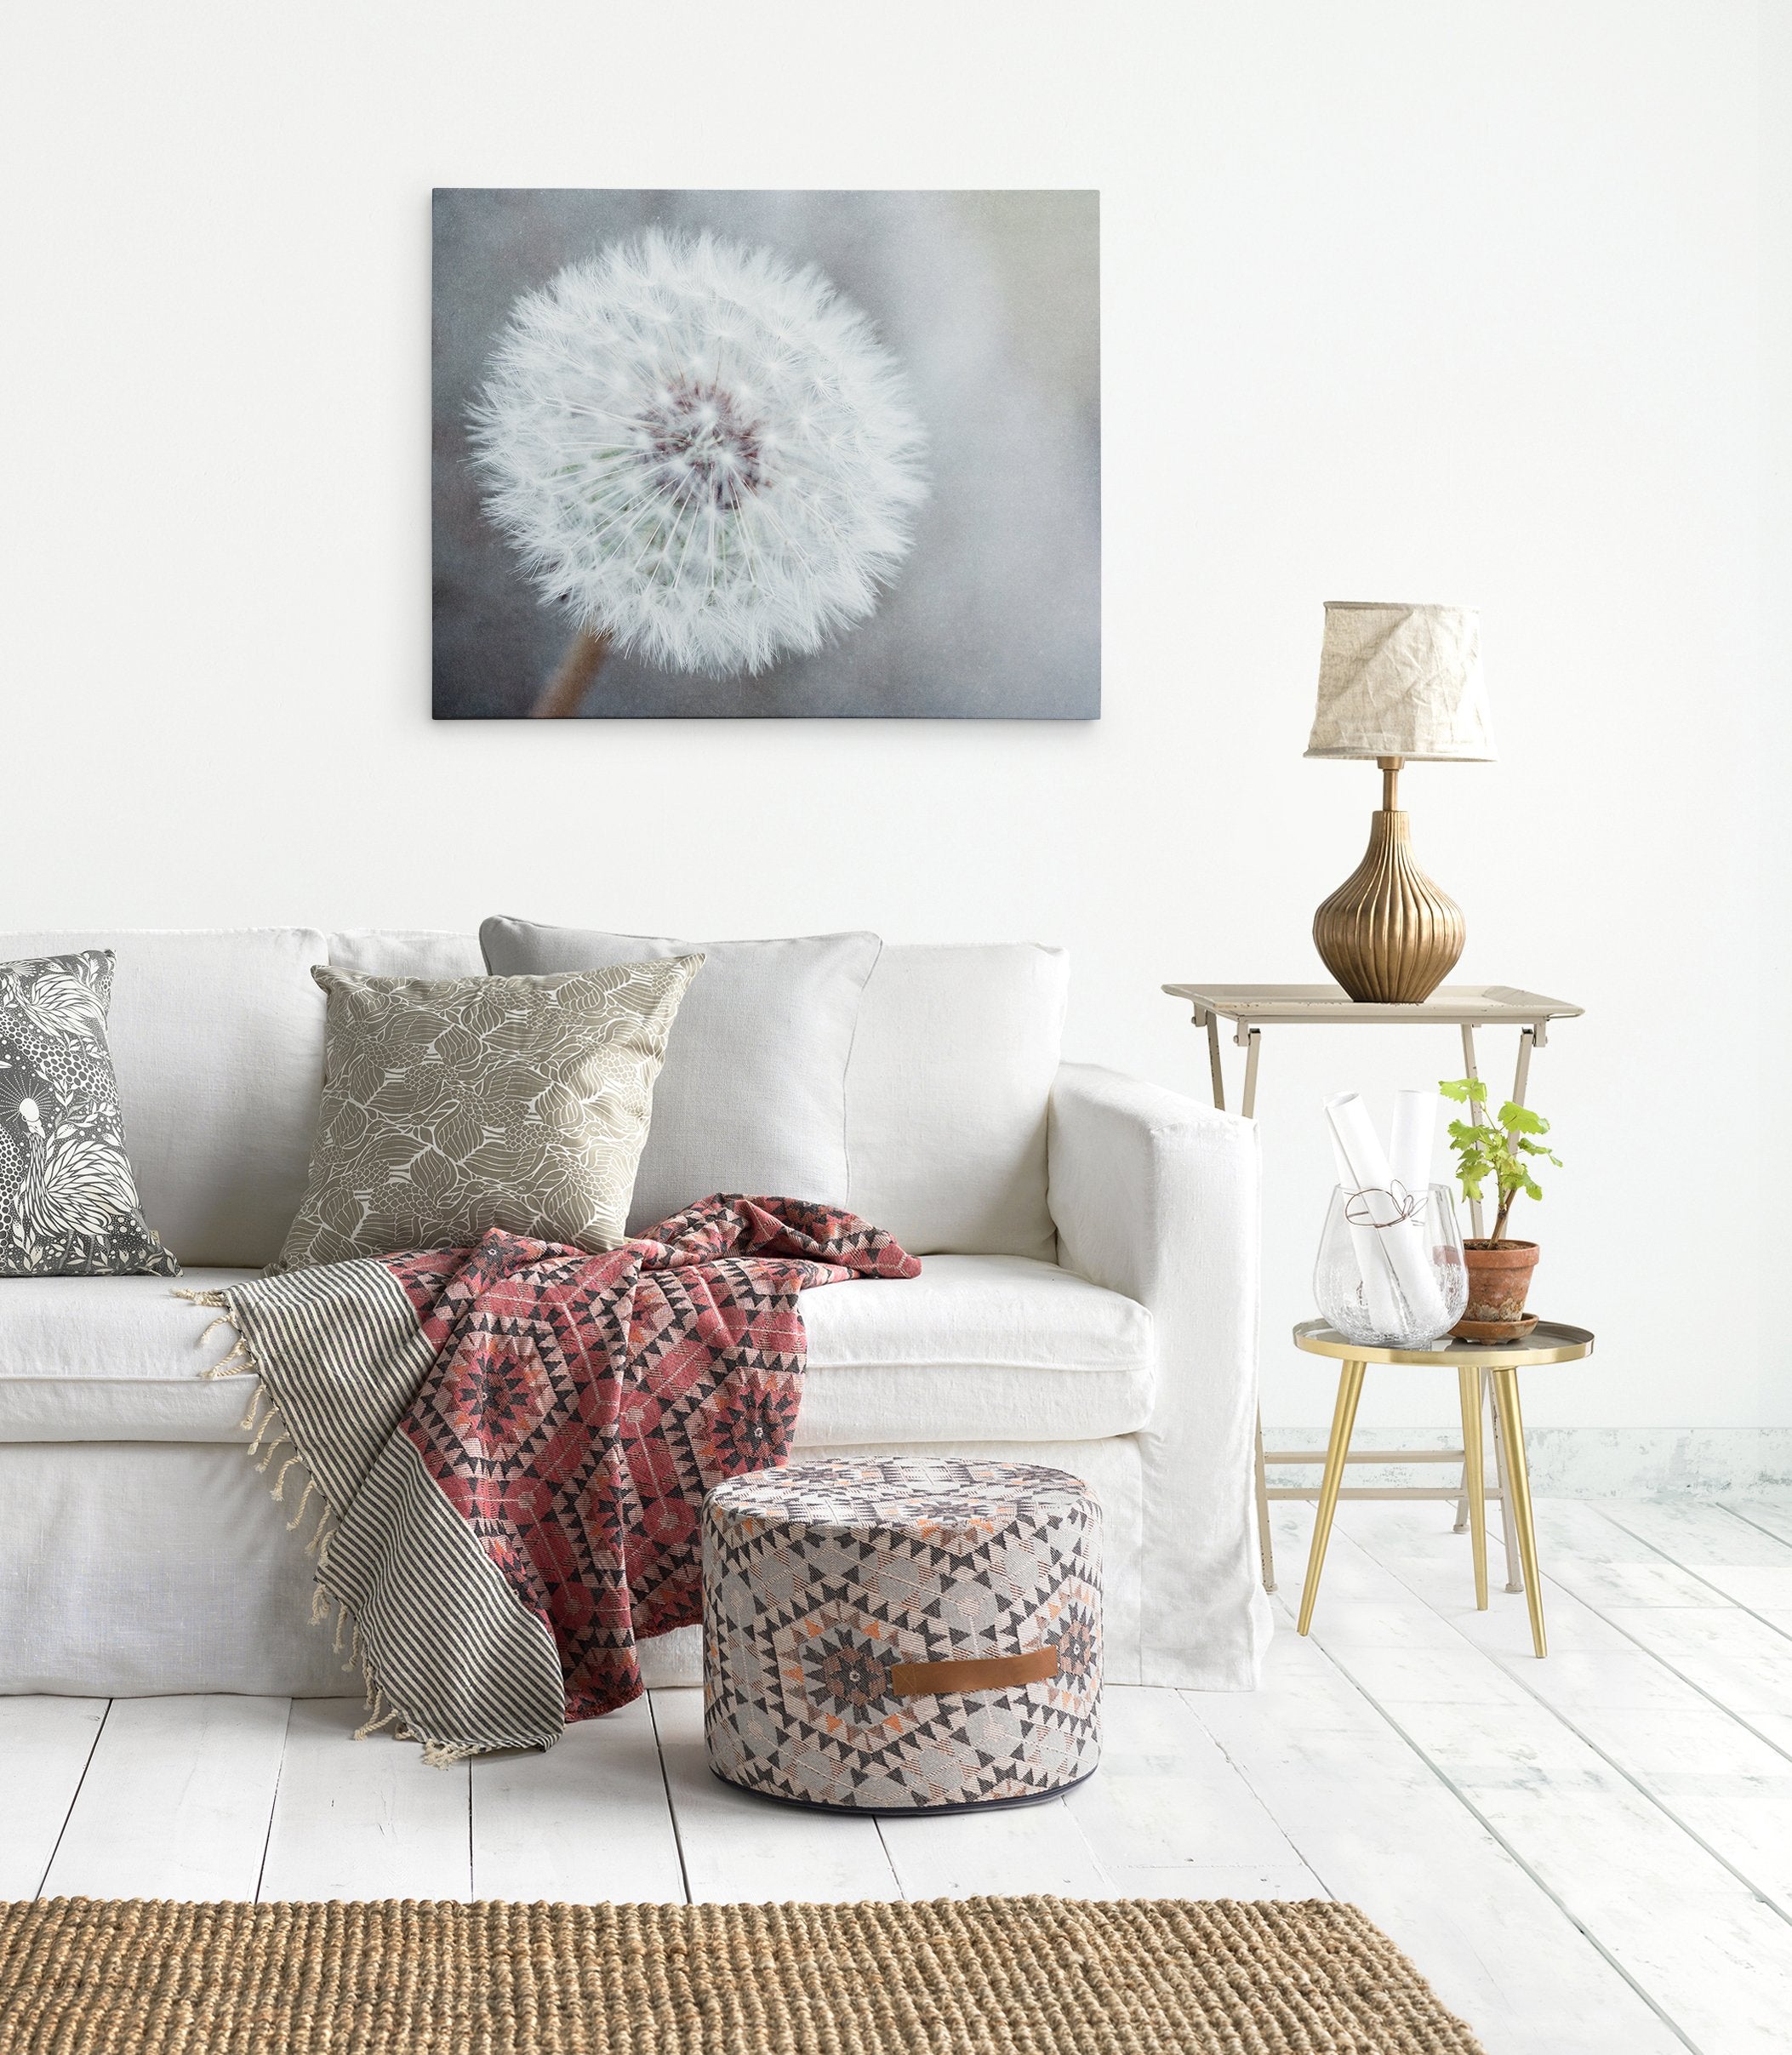 Dandelion canvas wall art in a living room